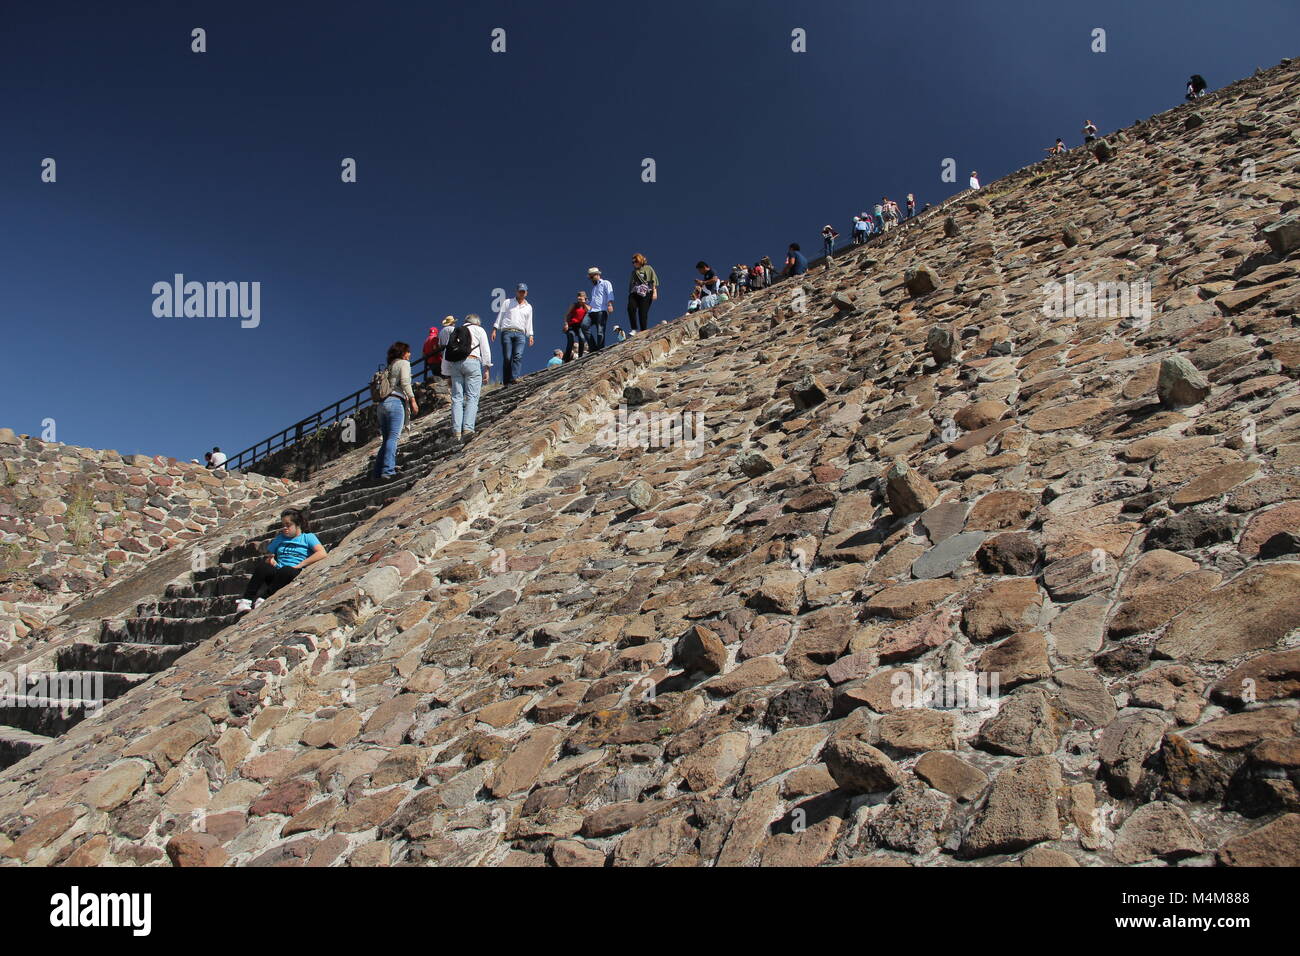 Teotihuacan. Mexico. Pyramid of the Sun. Stock Photo